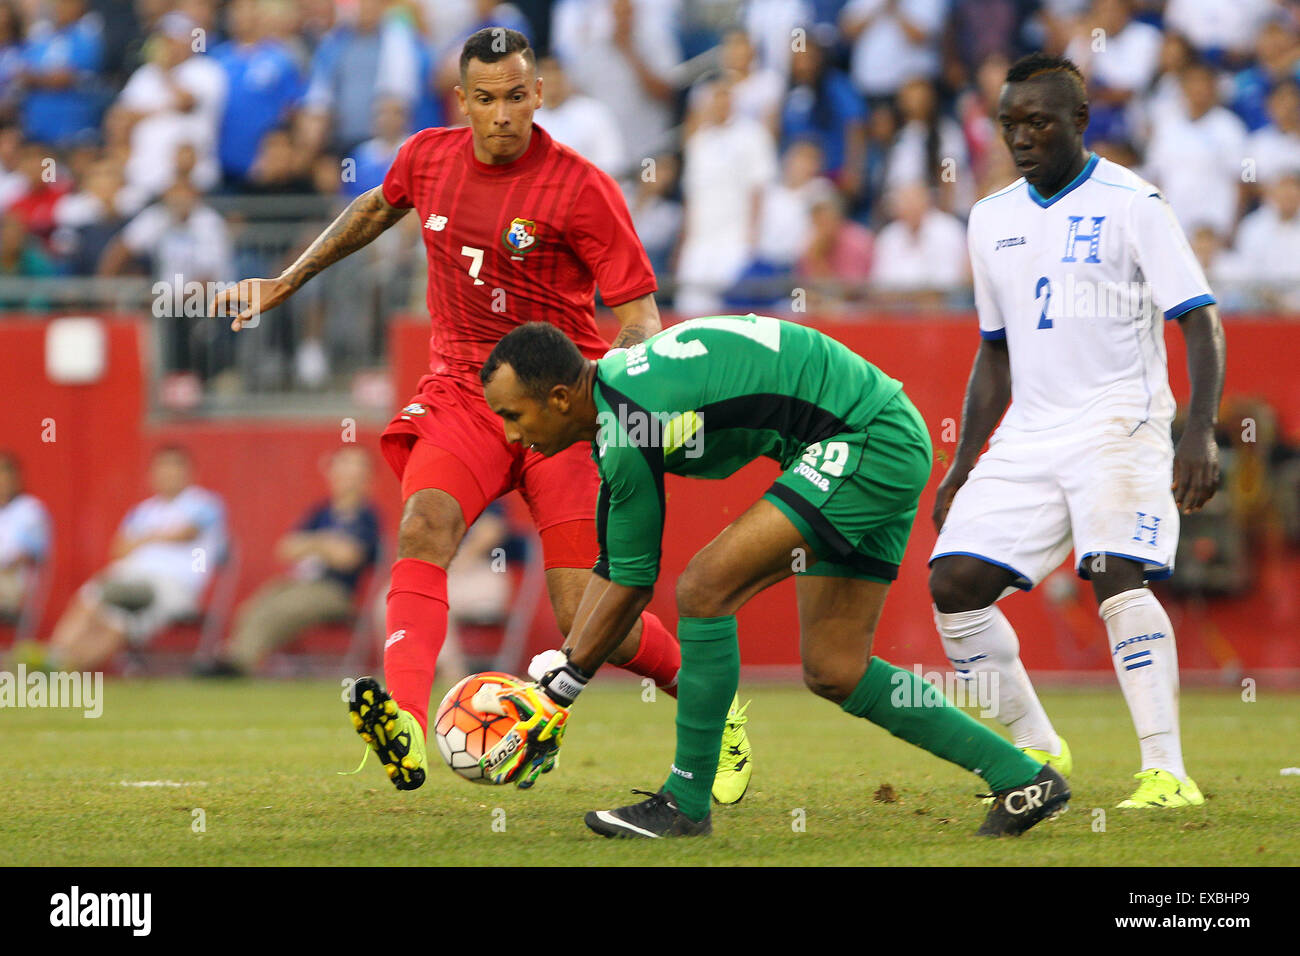 Foxborough, MA, USA. 10th July, 2015. Honduras goalkeeper Donis Escober (22) makes a save during the second half of the CONCACAF Gold Cup match between Panama and Honduras at Gillette Stadium. The match ended in a 1-1 tie. Anthony Nesmith/Cal Sport Media Credit:  Cal Sport Media/Alamy Live News Stock Photo